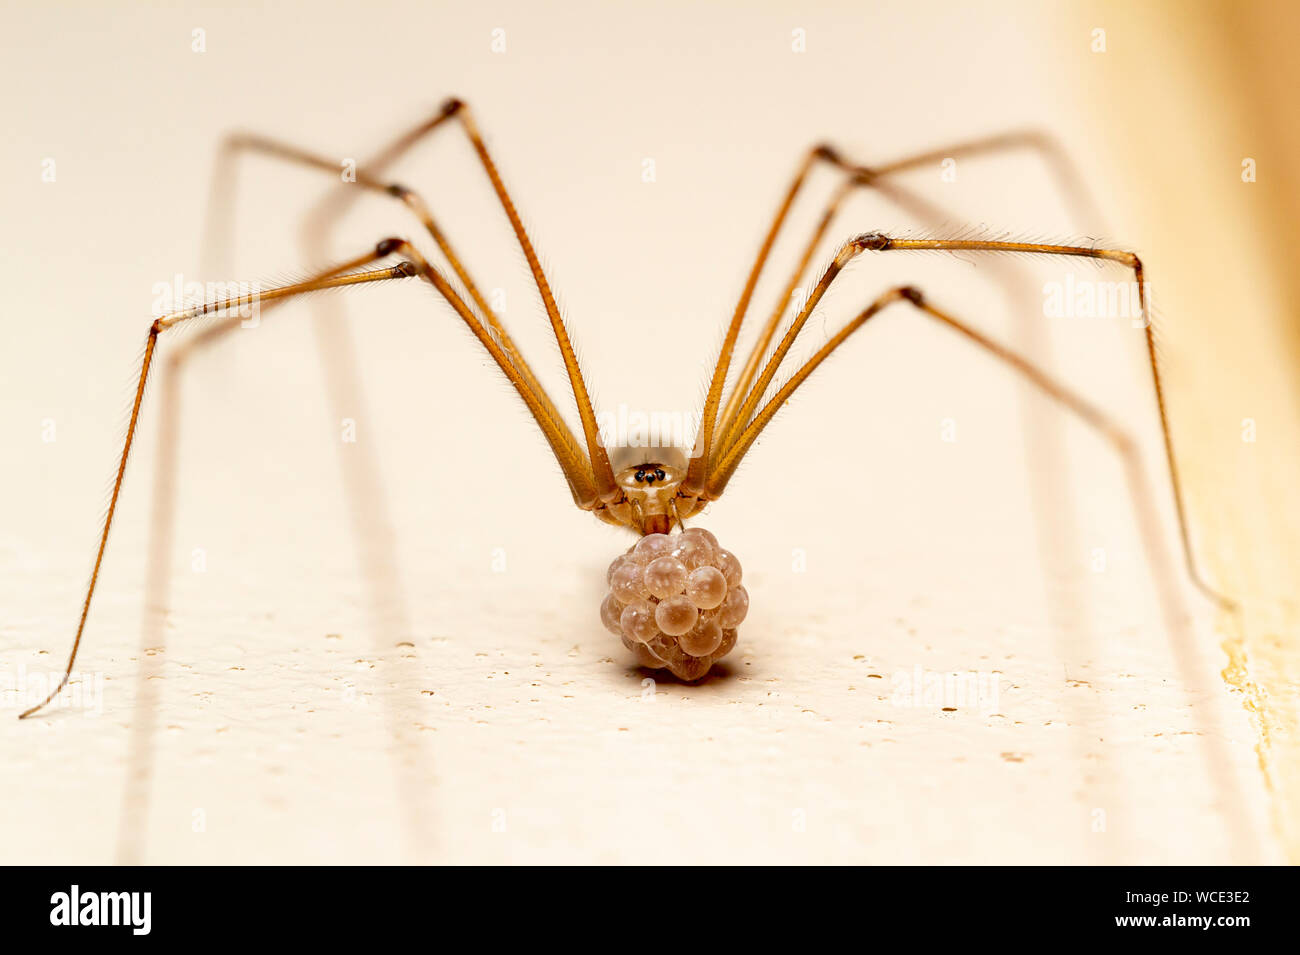 Cellar spider with her eggs (Pholcus phalangioides) Stock Photo